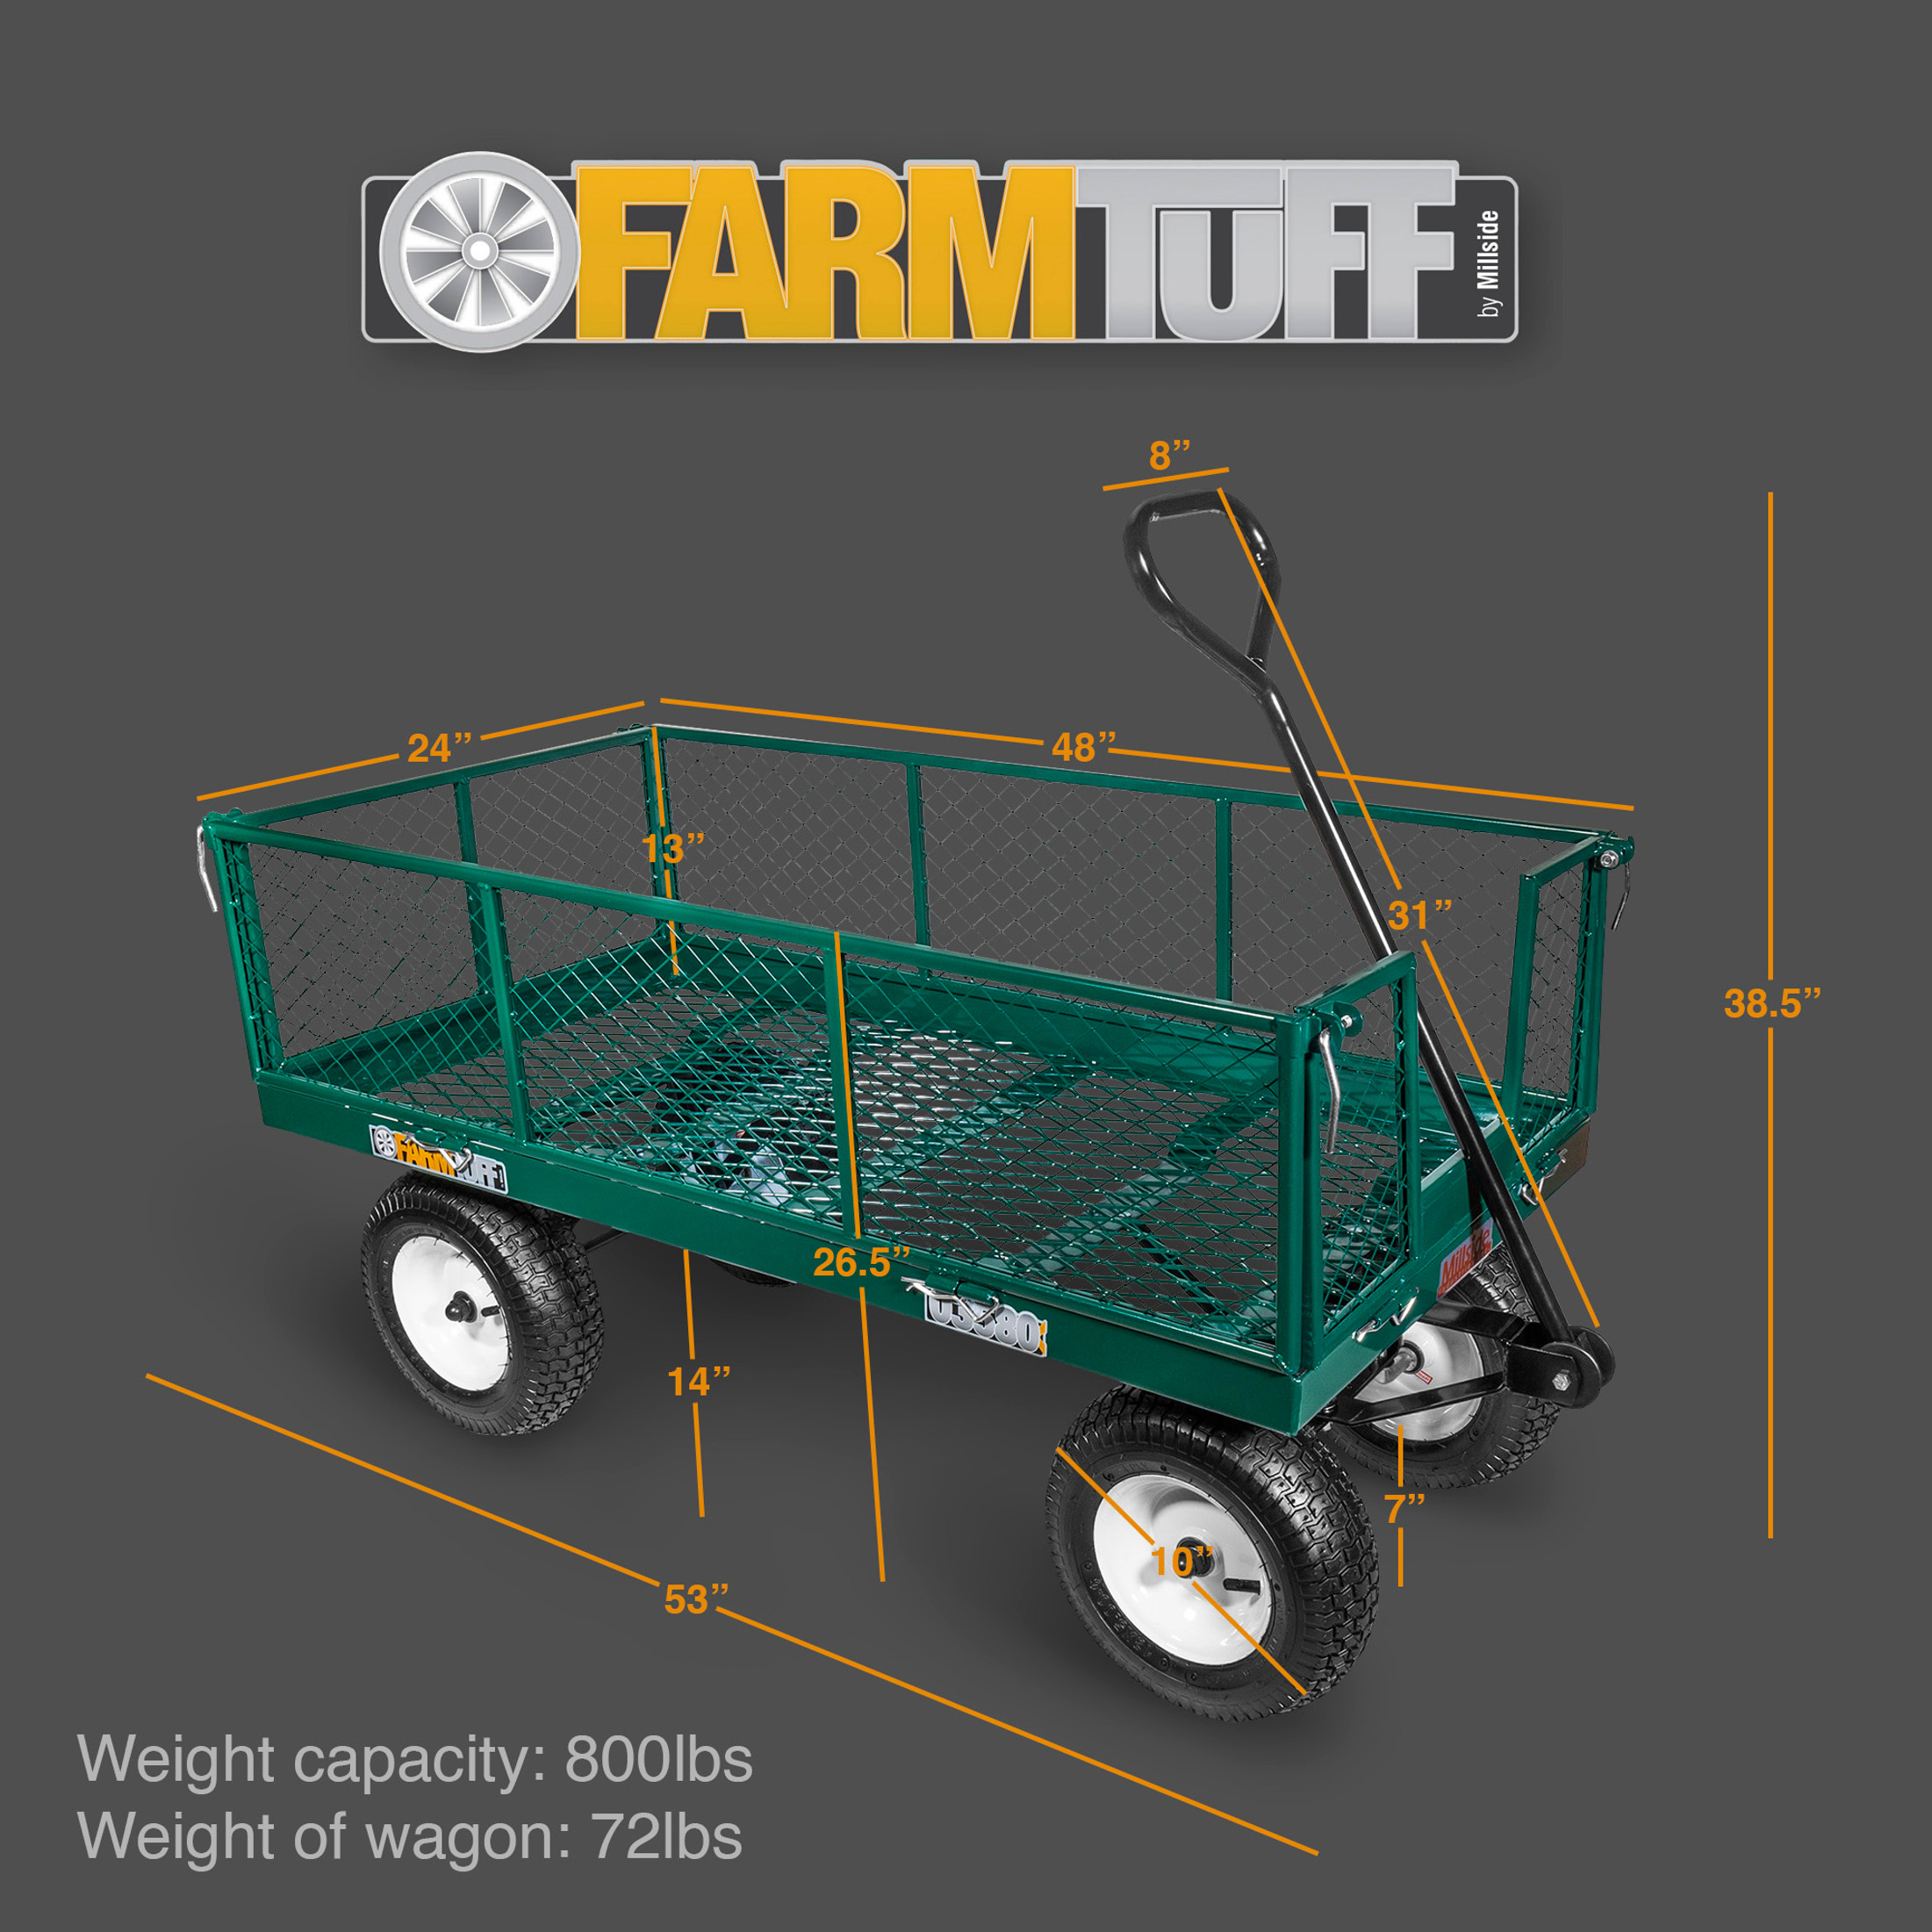 Farm Tuff Durable Metal Deck Garden Wagon Utility Cart with Pneumatic Tires and Fold Down Side Panels, Green, 24" x 48"